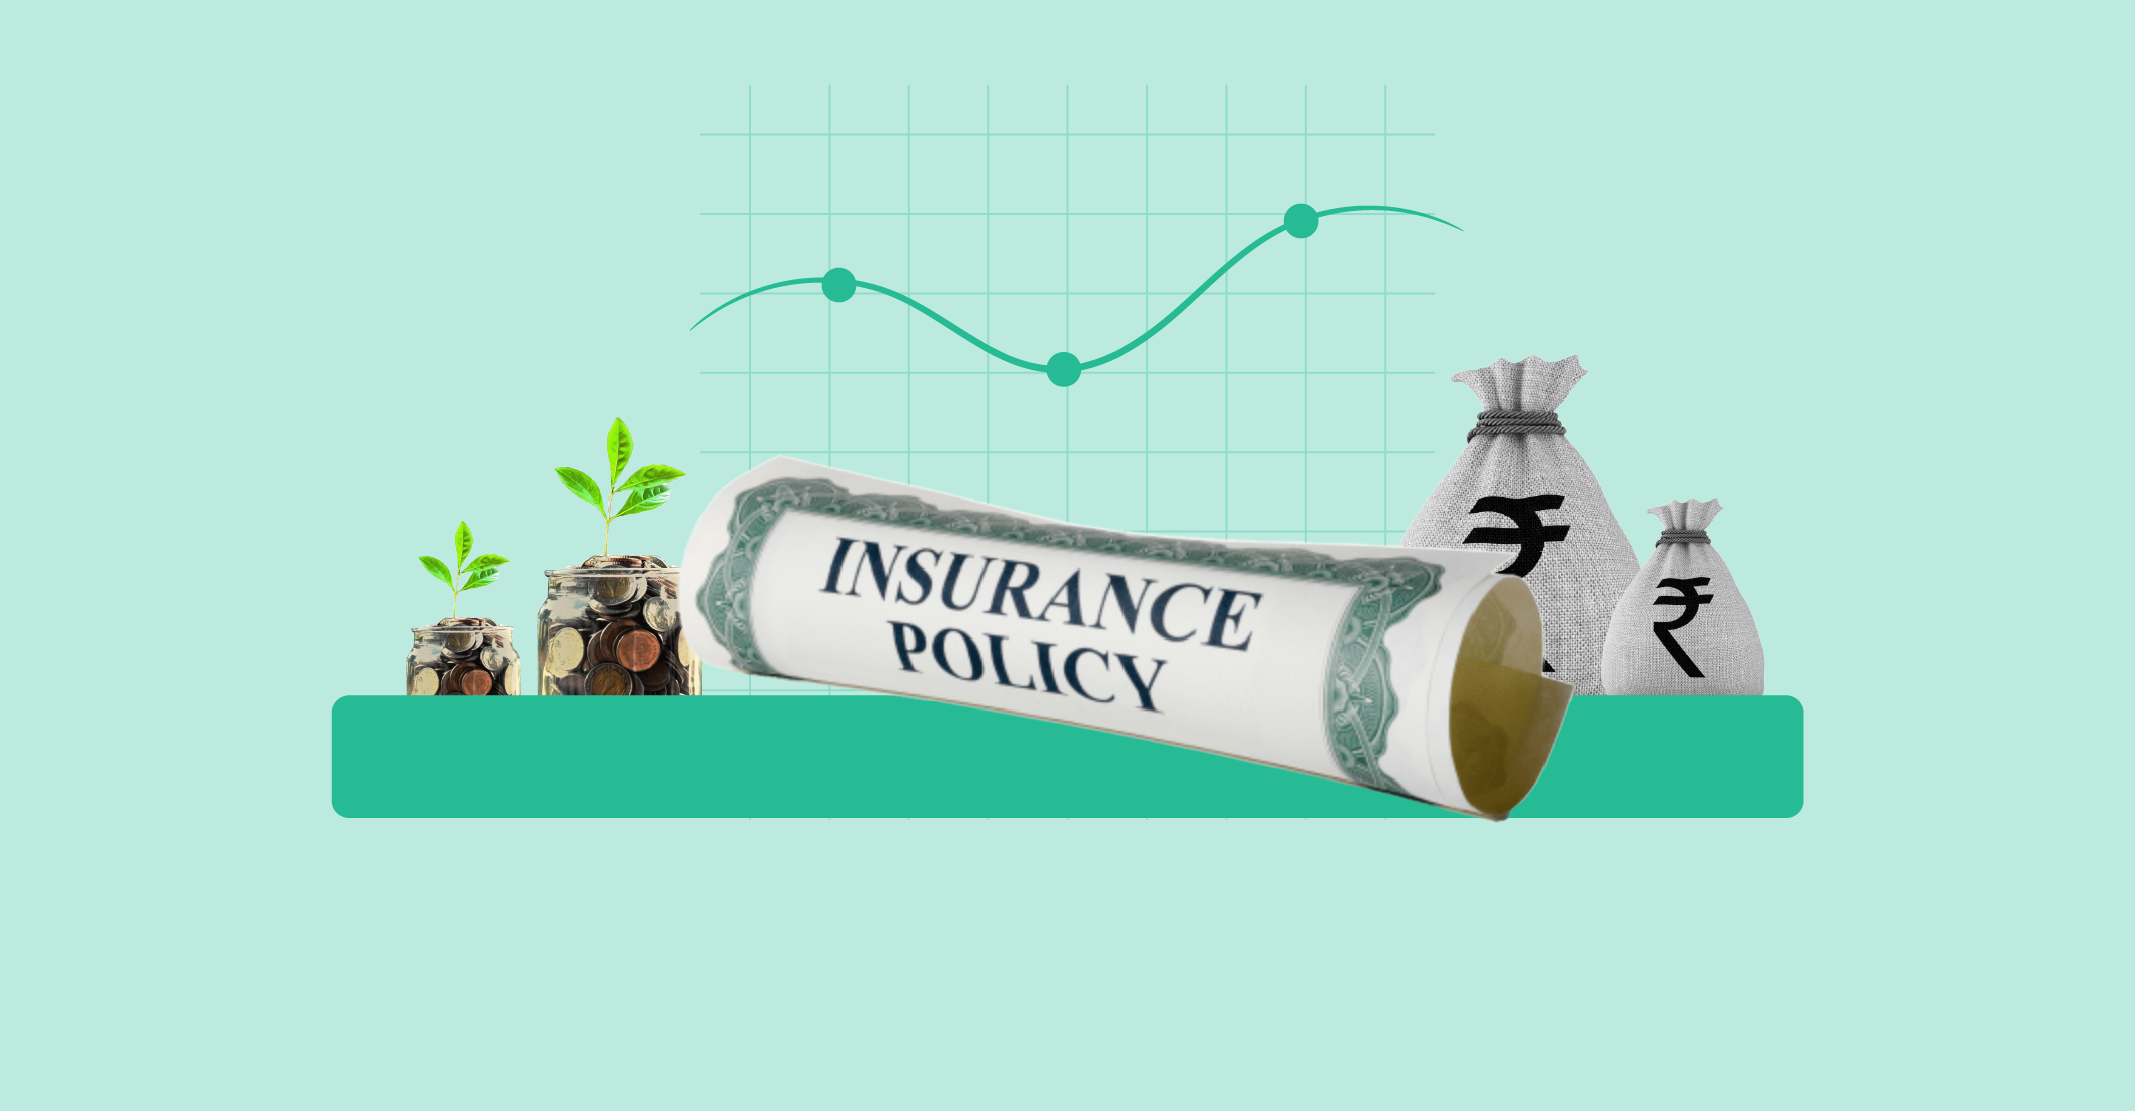 Best Life Insurance Policy